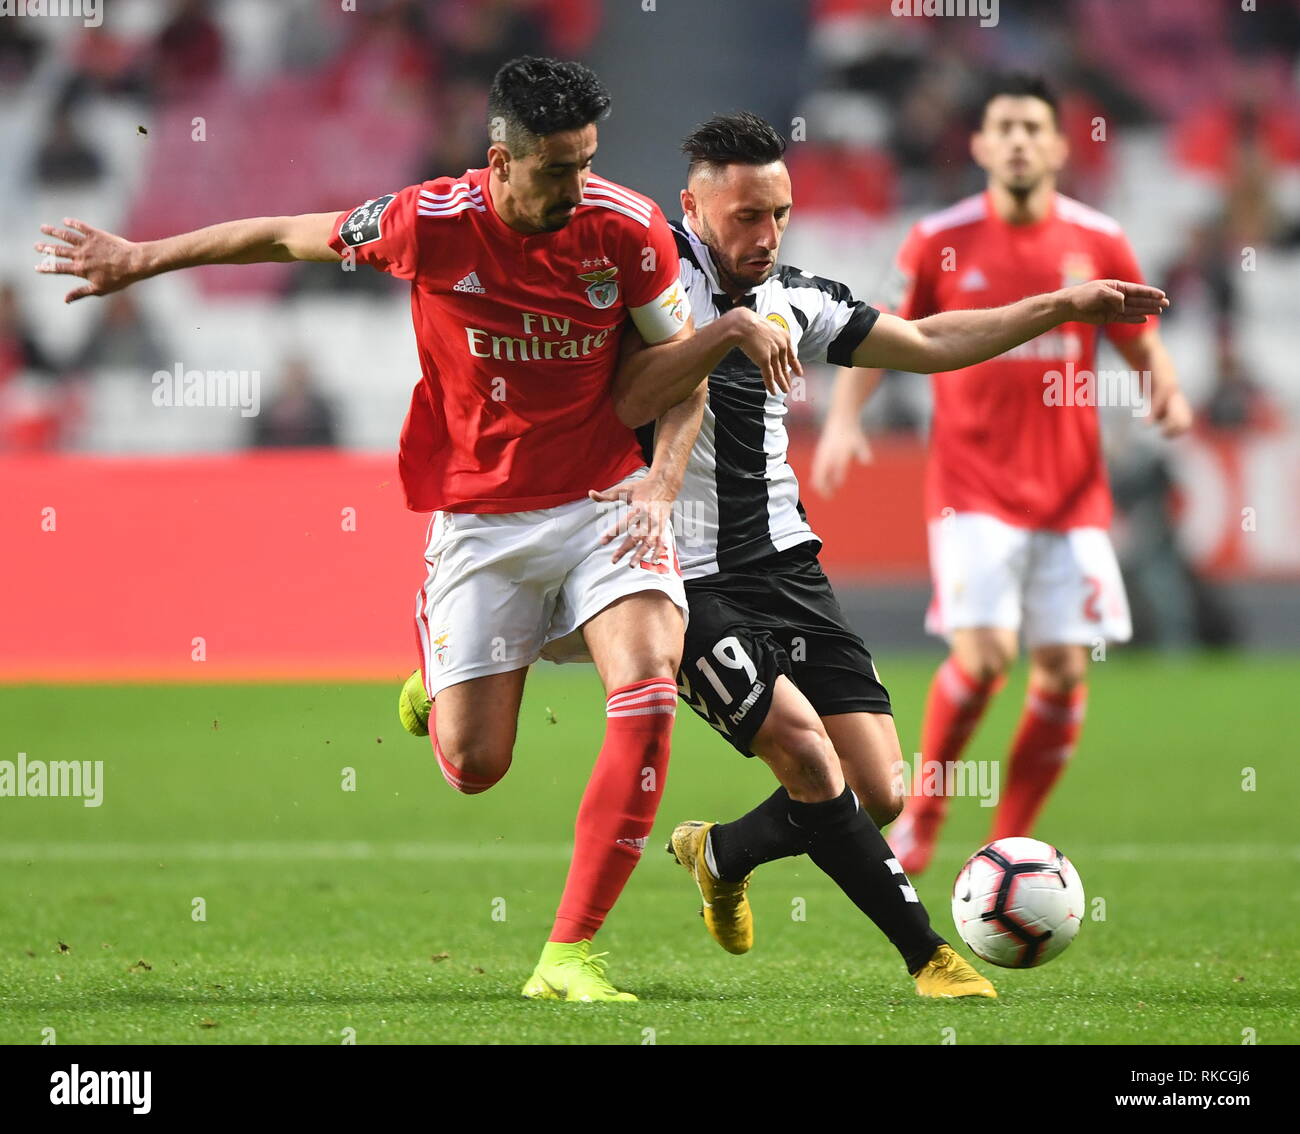 Lisbon, Portugal. 10th Feb, 2019. Andre Almeida (L) of Benfica vies with Joao Camacho of Nacional during the Portuguese League soccer match between SL Benfica and CD Nacional at Luz stadium in Lisbon, Portugal, on Feb. 10, 2019. Benfica won 10-0. Credit: Zhang Yadong/Xinhua/Alamy Live News Stock Photo